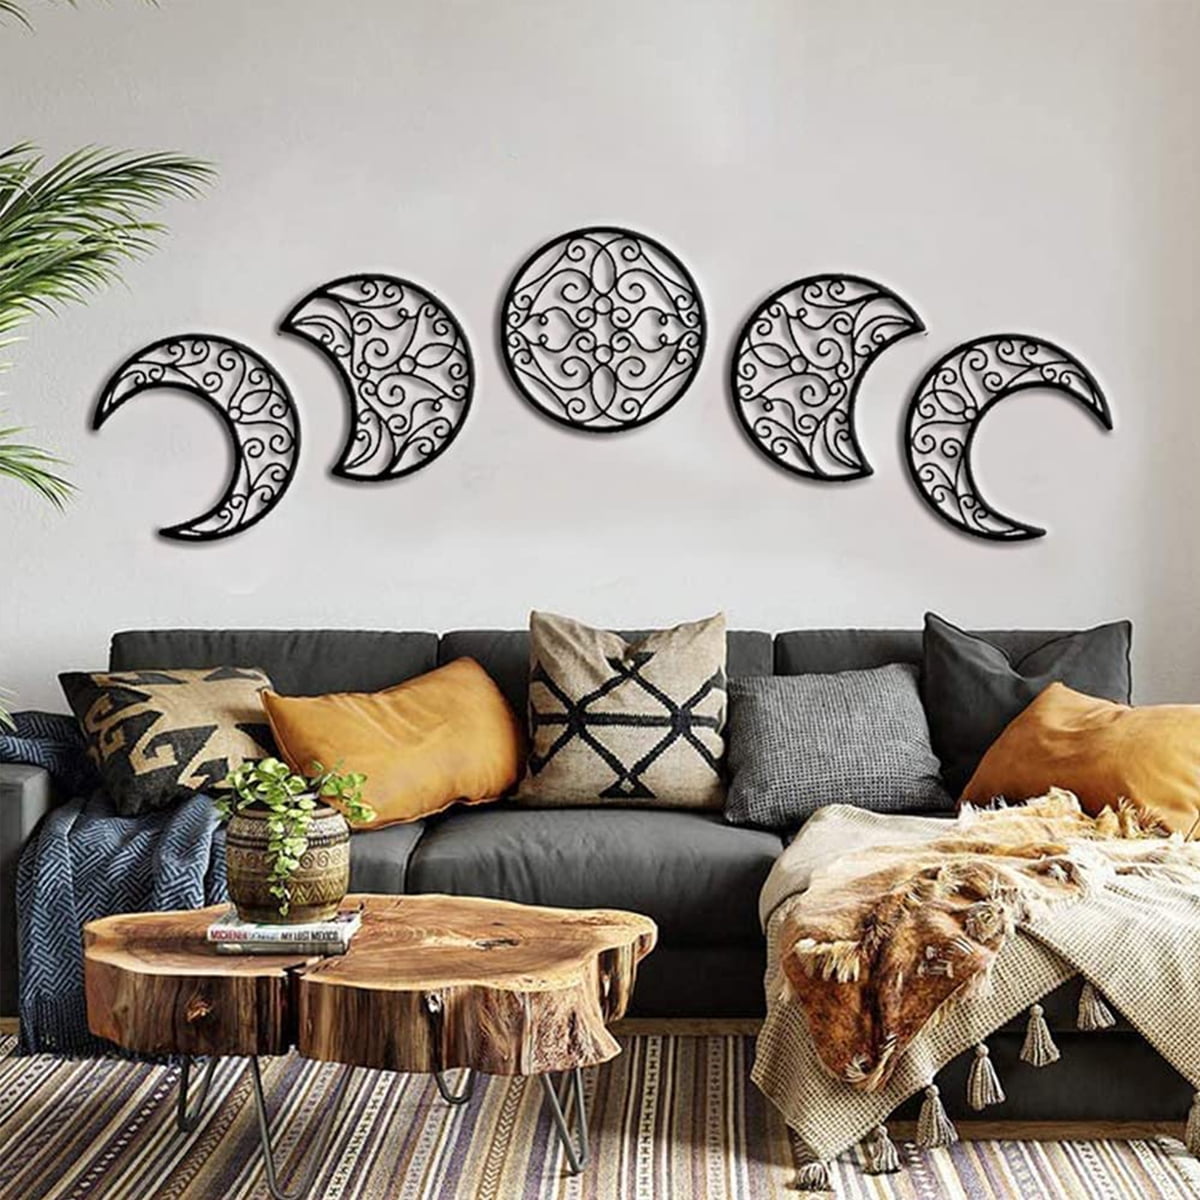 Everso 5Pcs Wooden Frame MoonPhase Wall Sticker,Moon Phase Wall Decorations,Wooden  Moon Phases Wall Hanging Home Decor Background Gift